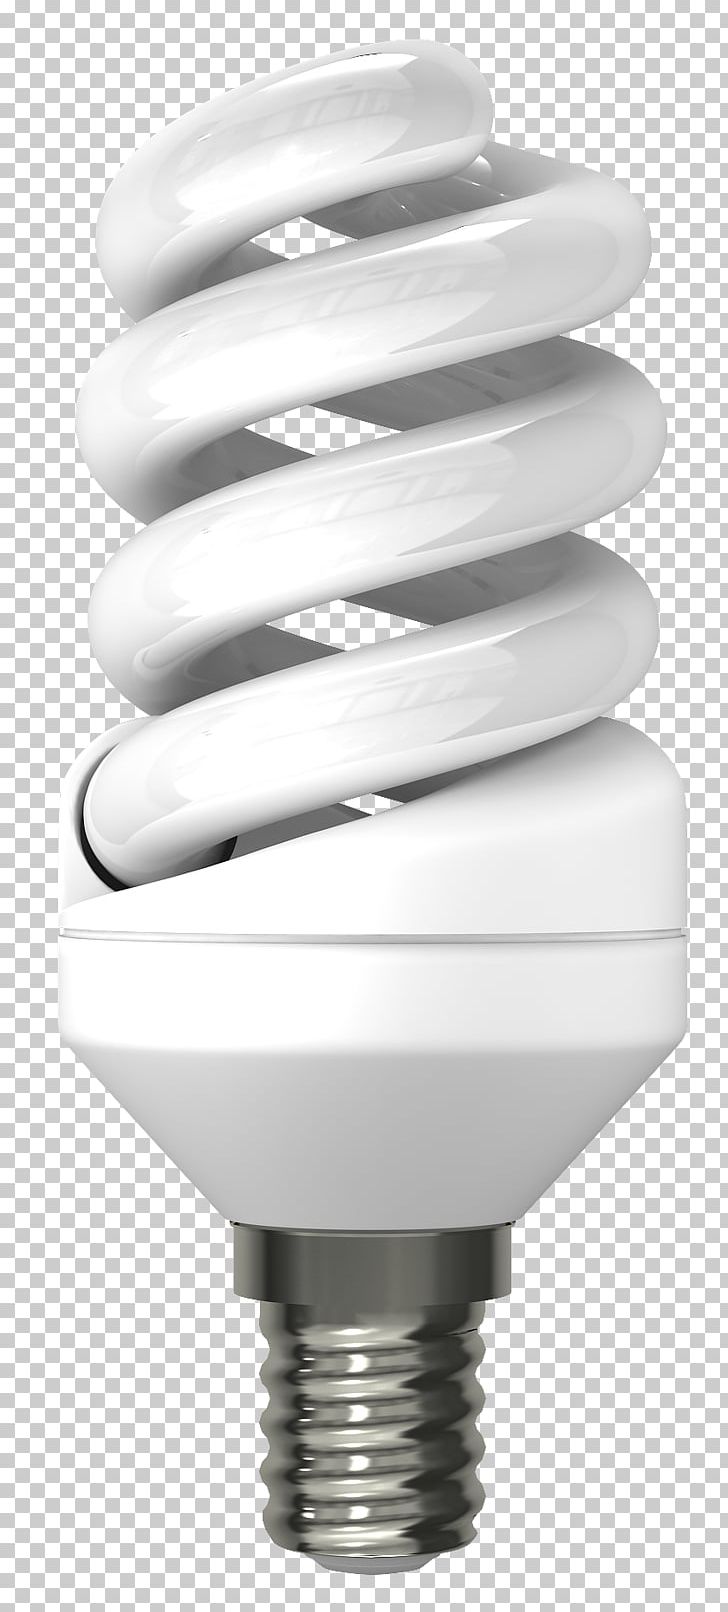 Incandescent Light Bulb Lighting PNG, Clipart, Compact Fluorescent Lamp, Daylight, Download, Electricity, Electric Light Free PNG Download